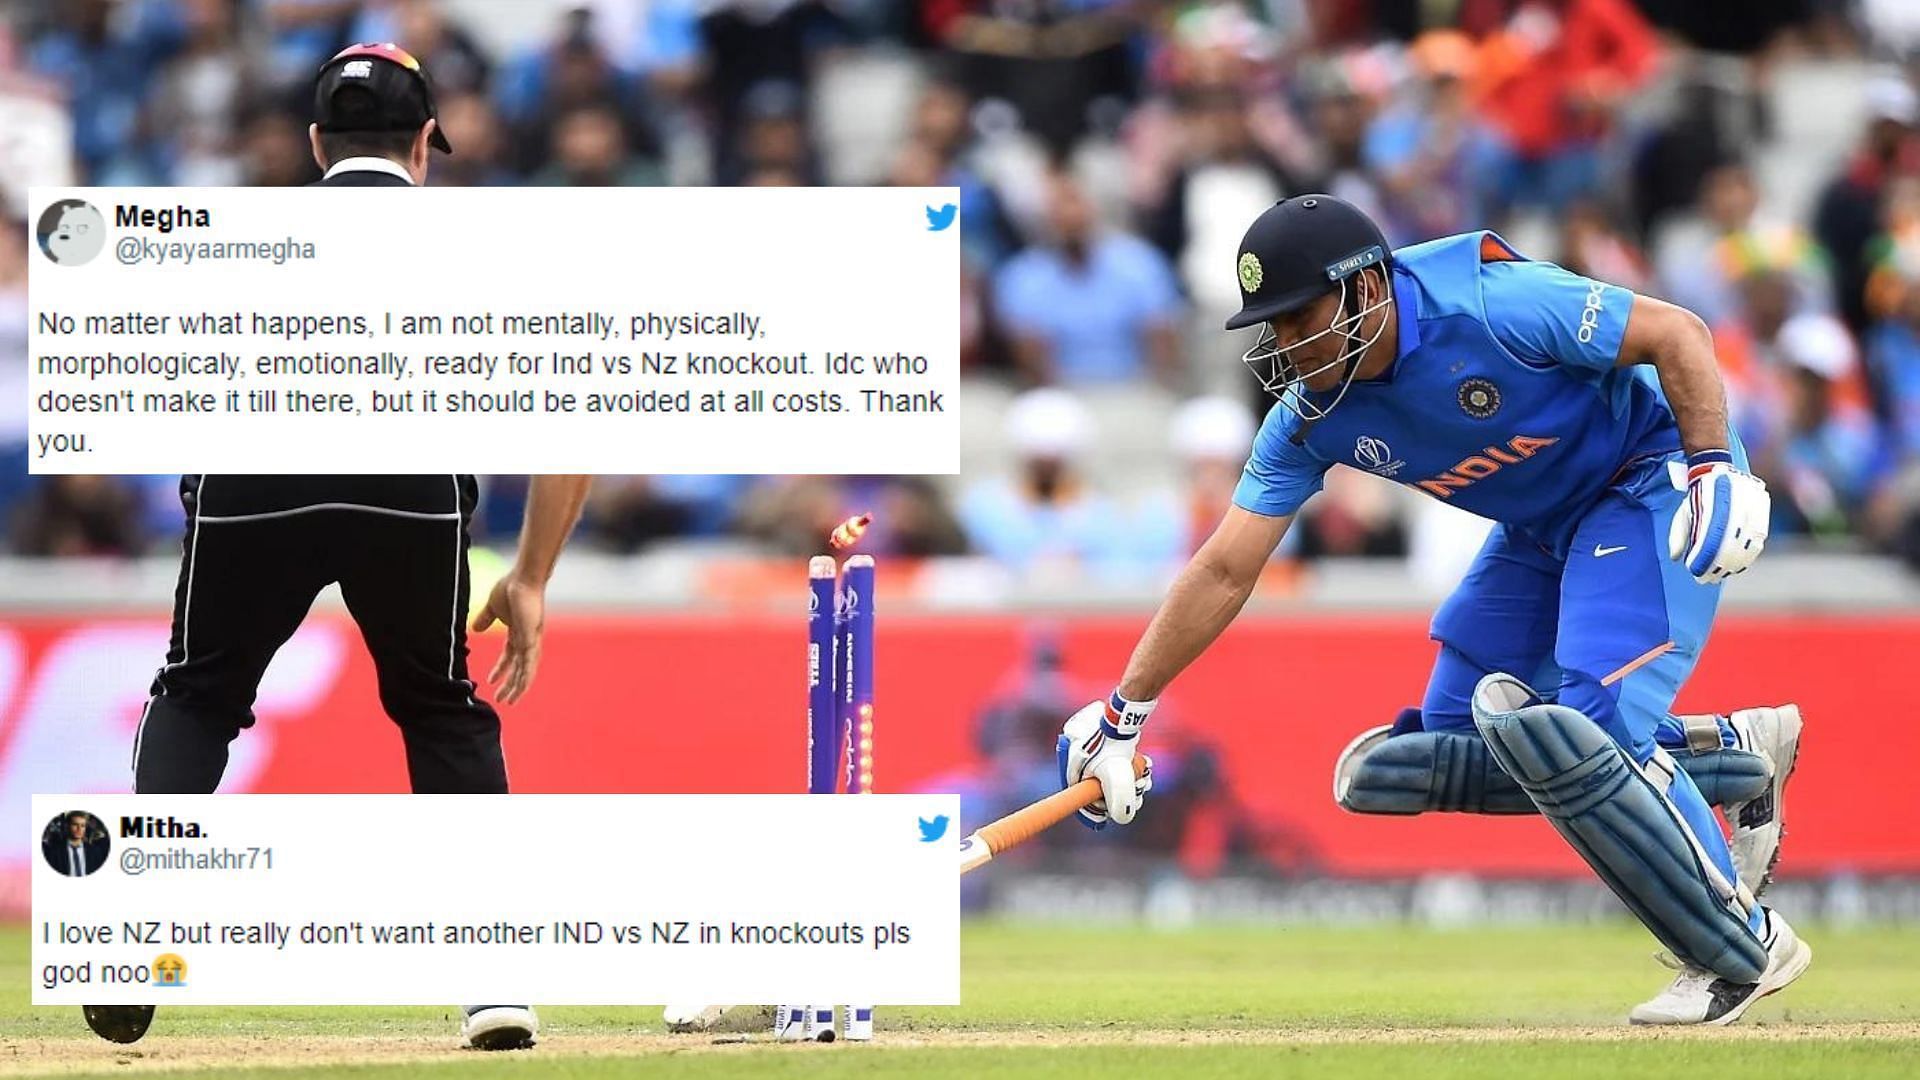 Indian fans recalled some painful memories of NZ breaking their hearts in knockouts of late. (P.C.:Getty)